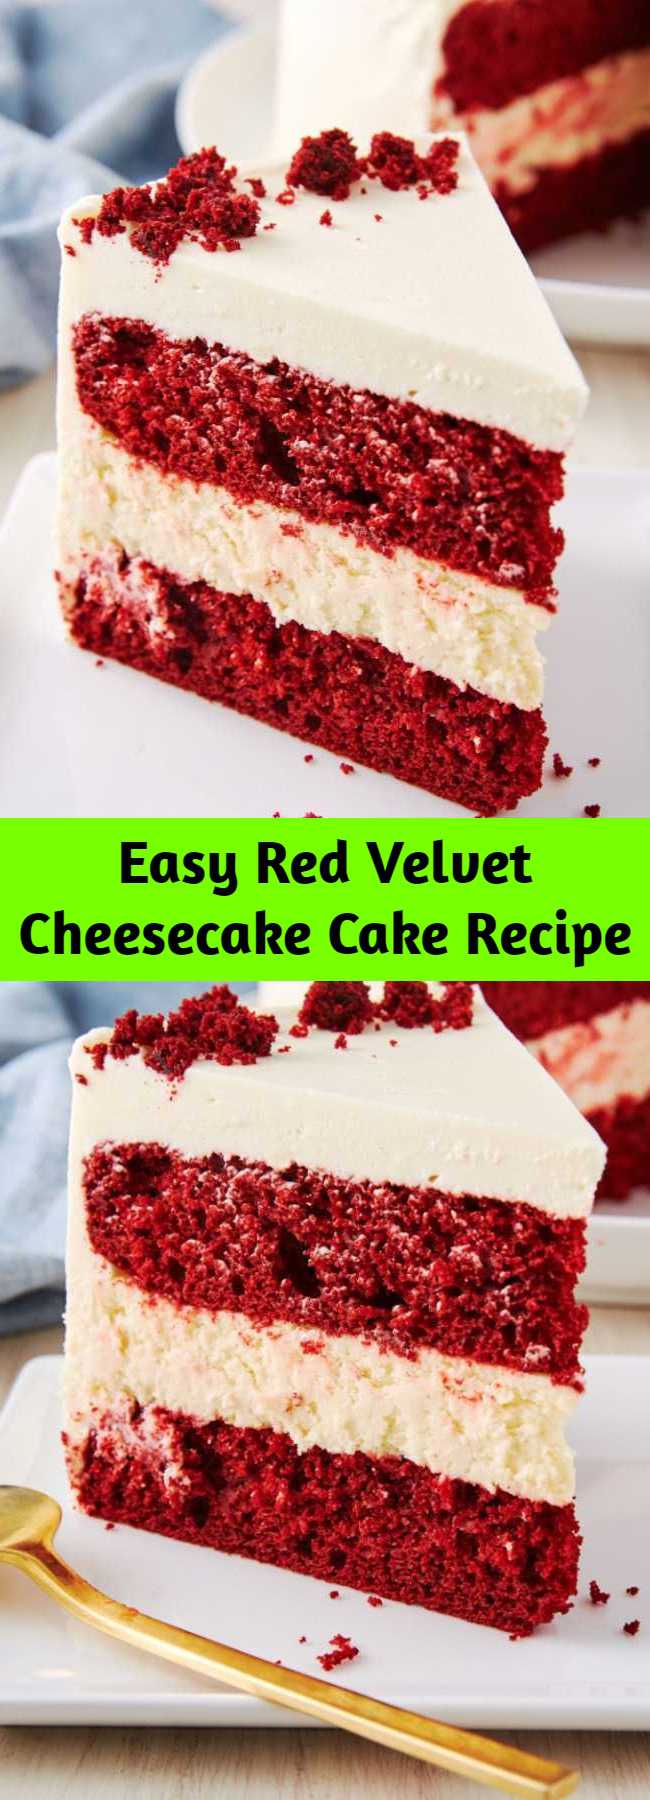 Easy Red Velvet Cheesecake Cake Recipe - Nothing screams Christmas dessert like red velvet cake. We made it even crazier by layering two cakes between a thick layer of plain cheesecake. #easy #recipe #redvelvet #cheesecake #cake #baking #desserts #holidays #christmas #menuideas #creamcheese #frosting